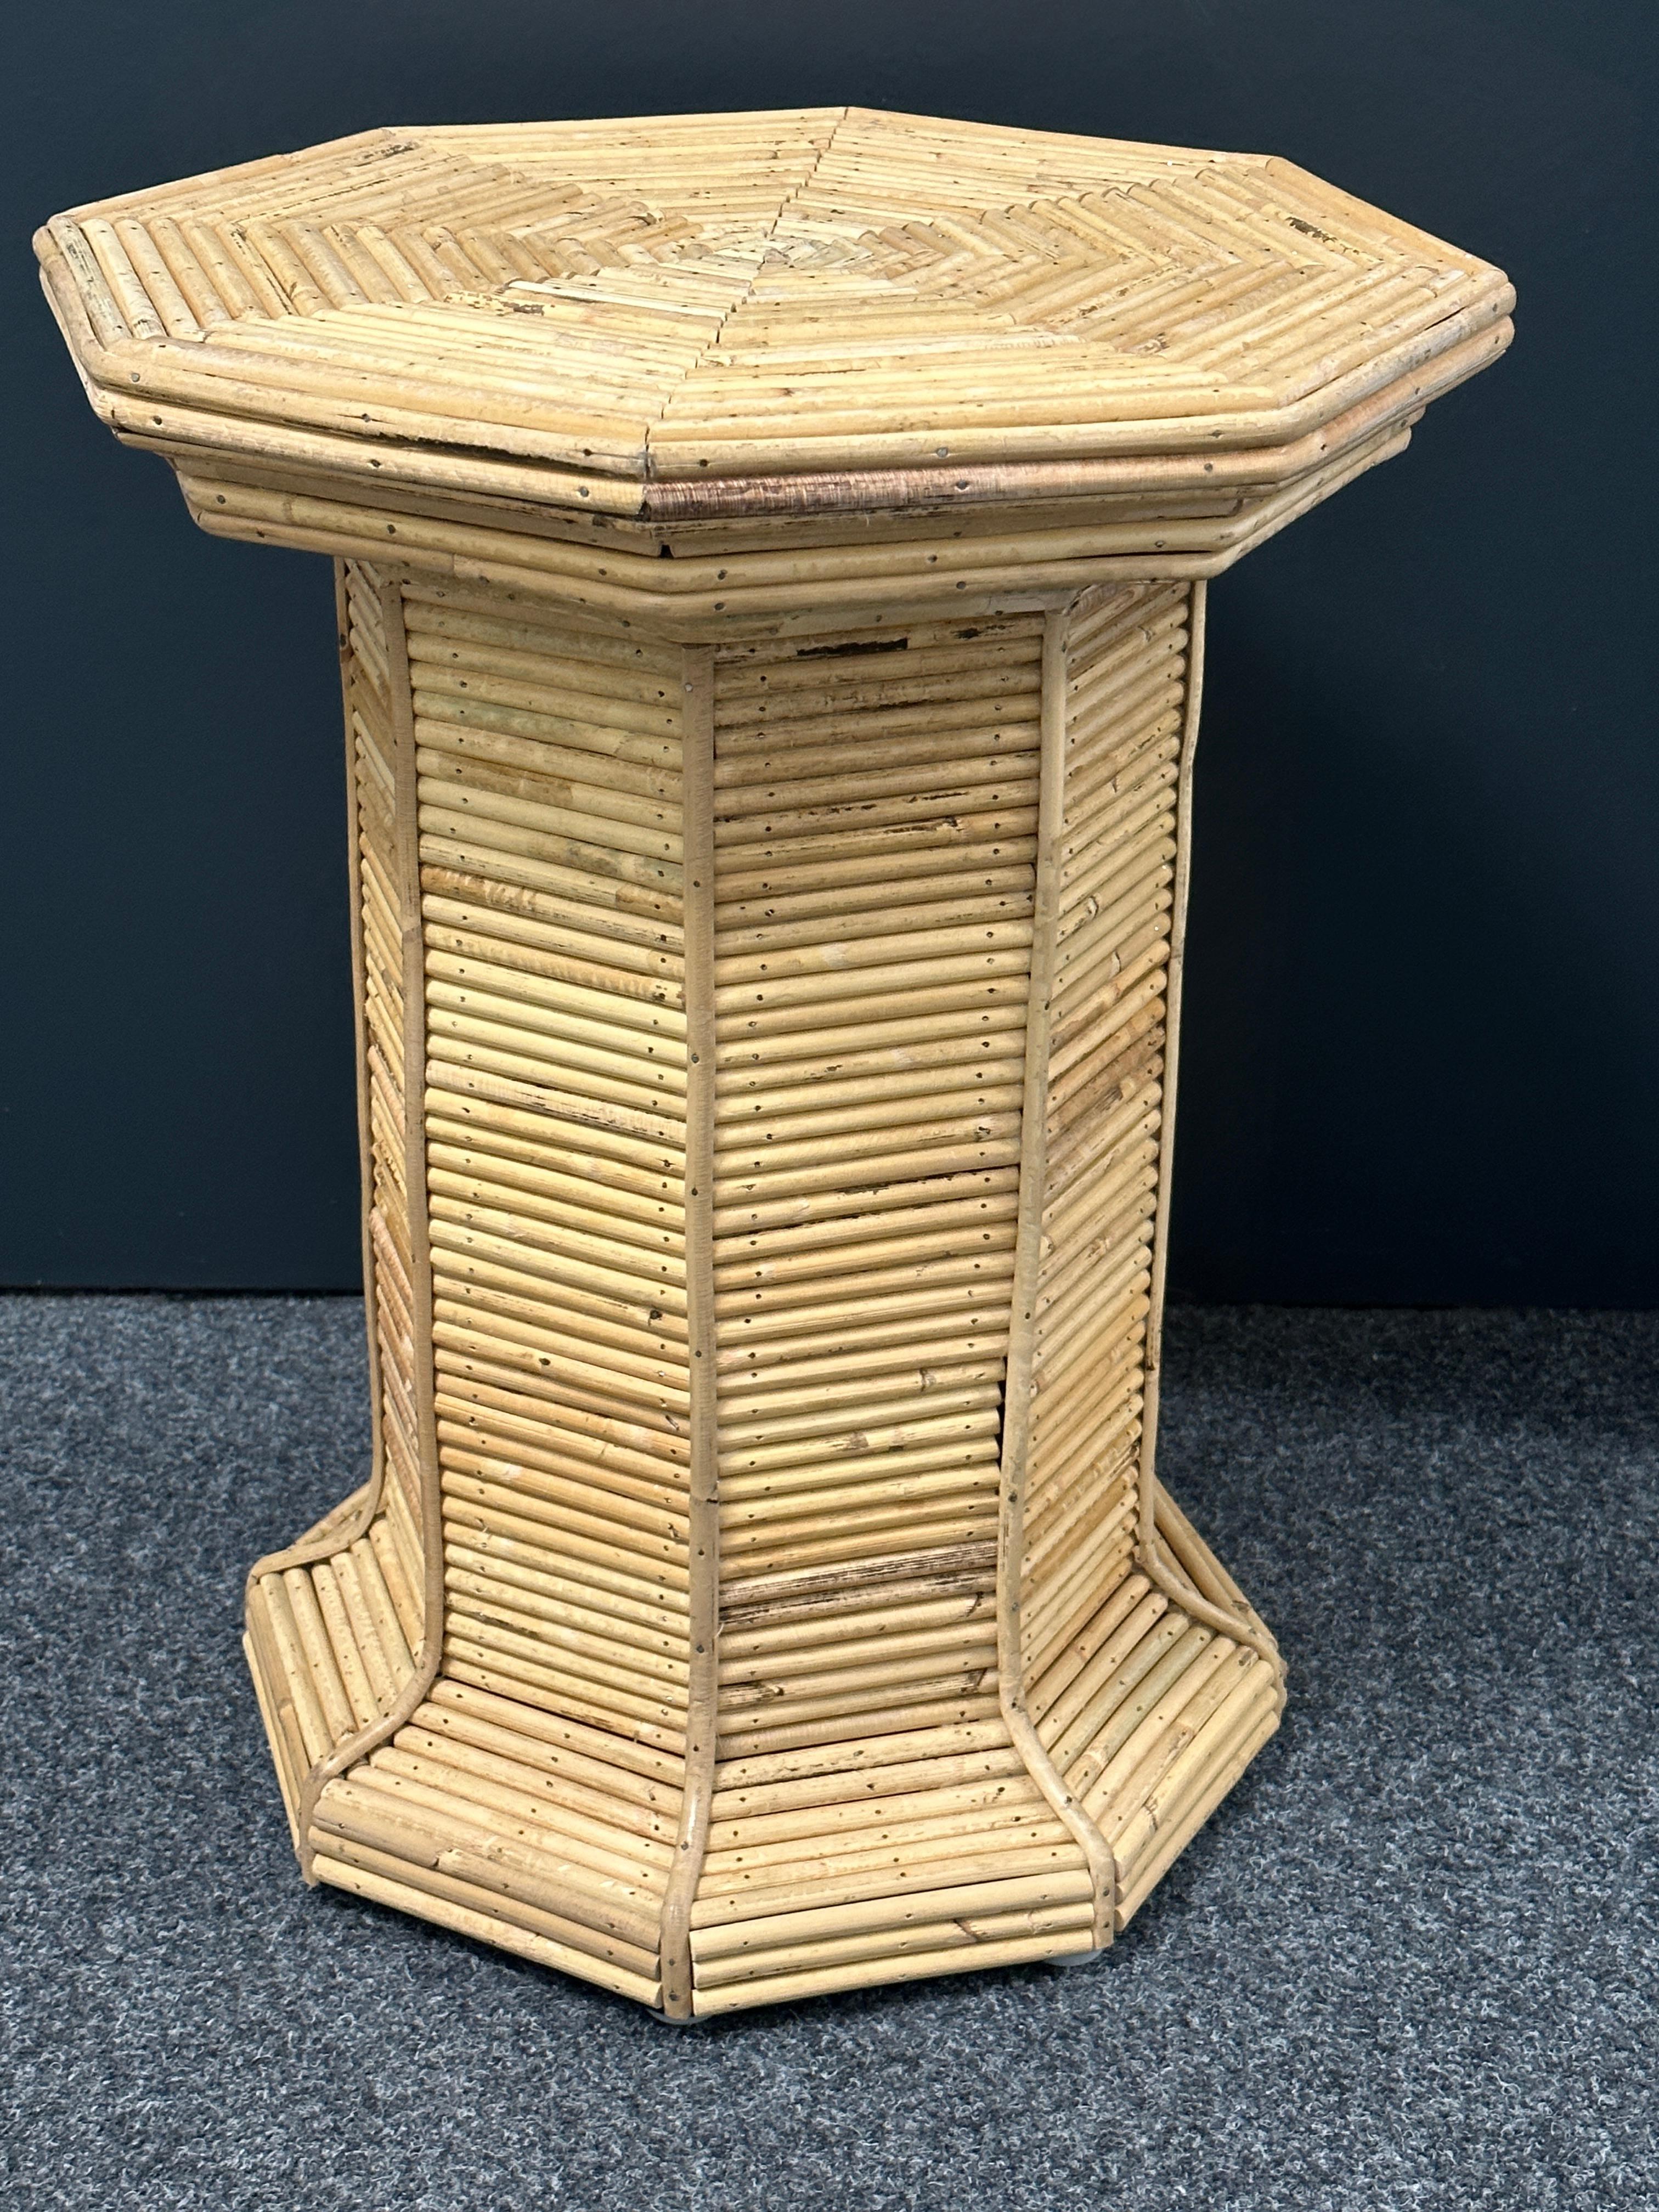 Late 20th Century Vivai del Sud Bamboo Handcrafted Stylish Mid-Century Modern Rattan Pedestal  For Sale